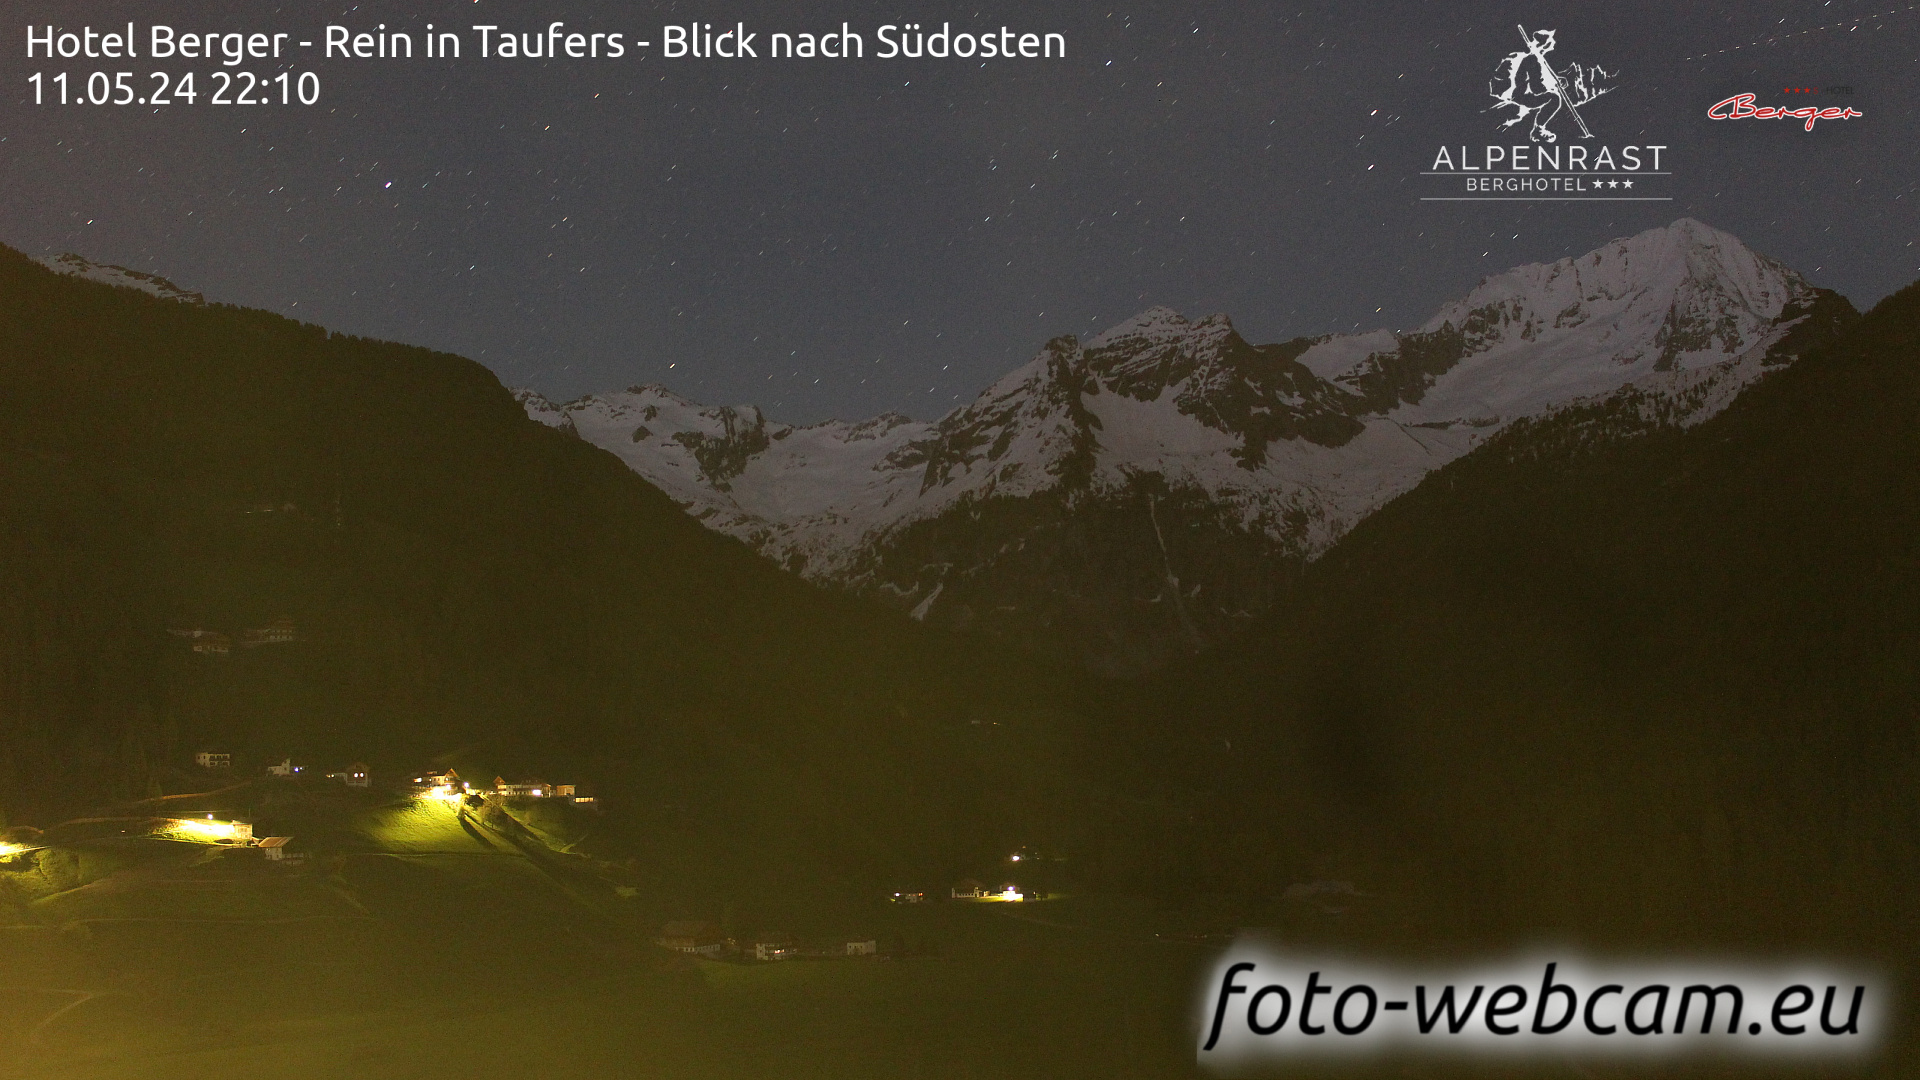 Rein in Taufers Ons. 22:11